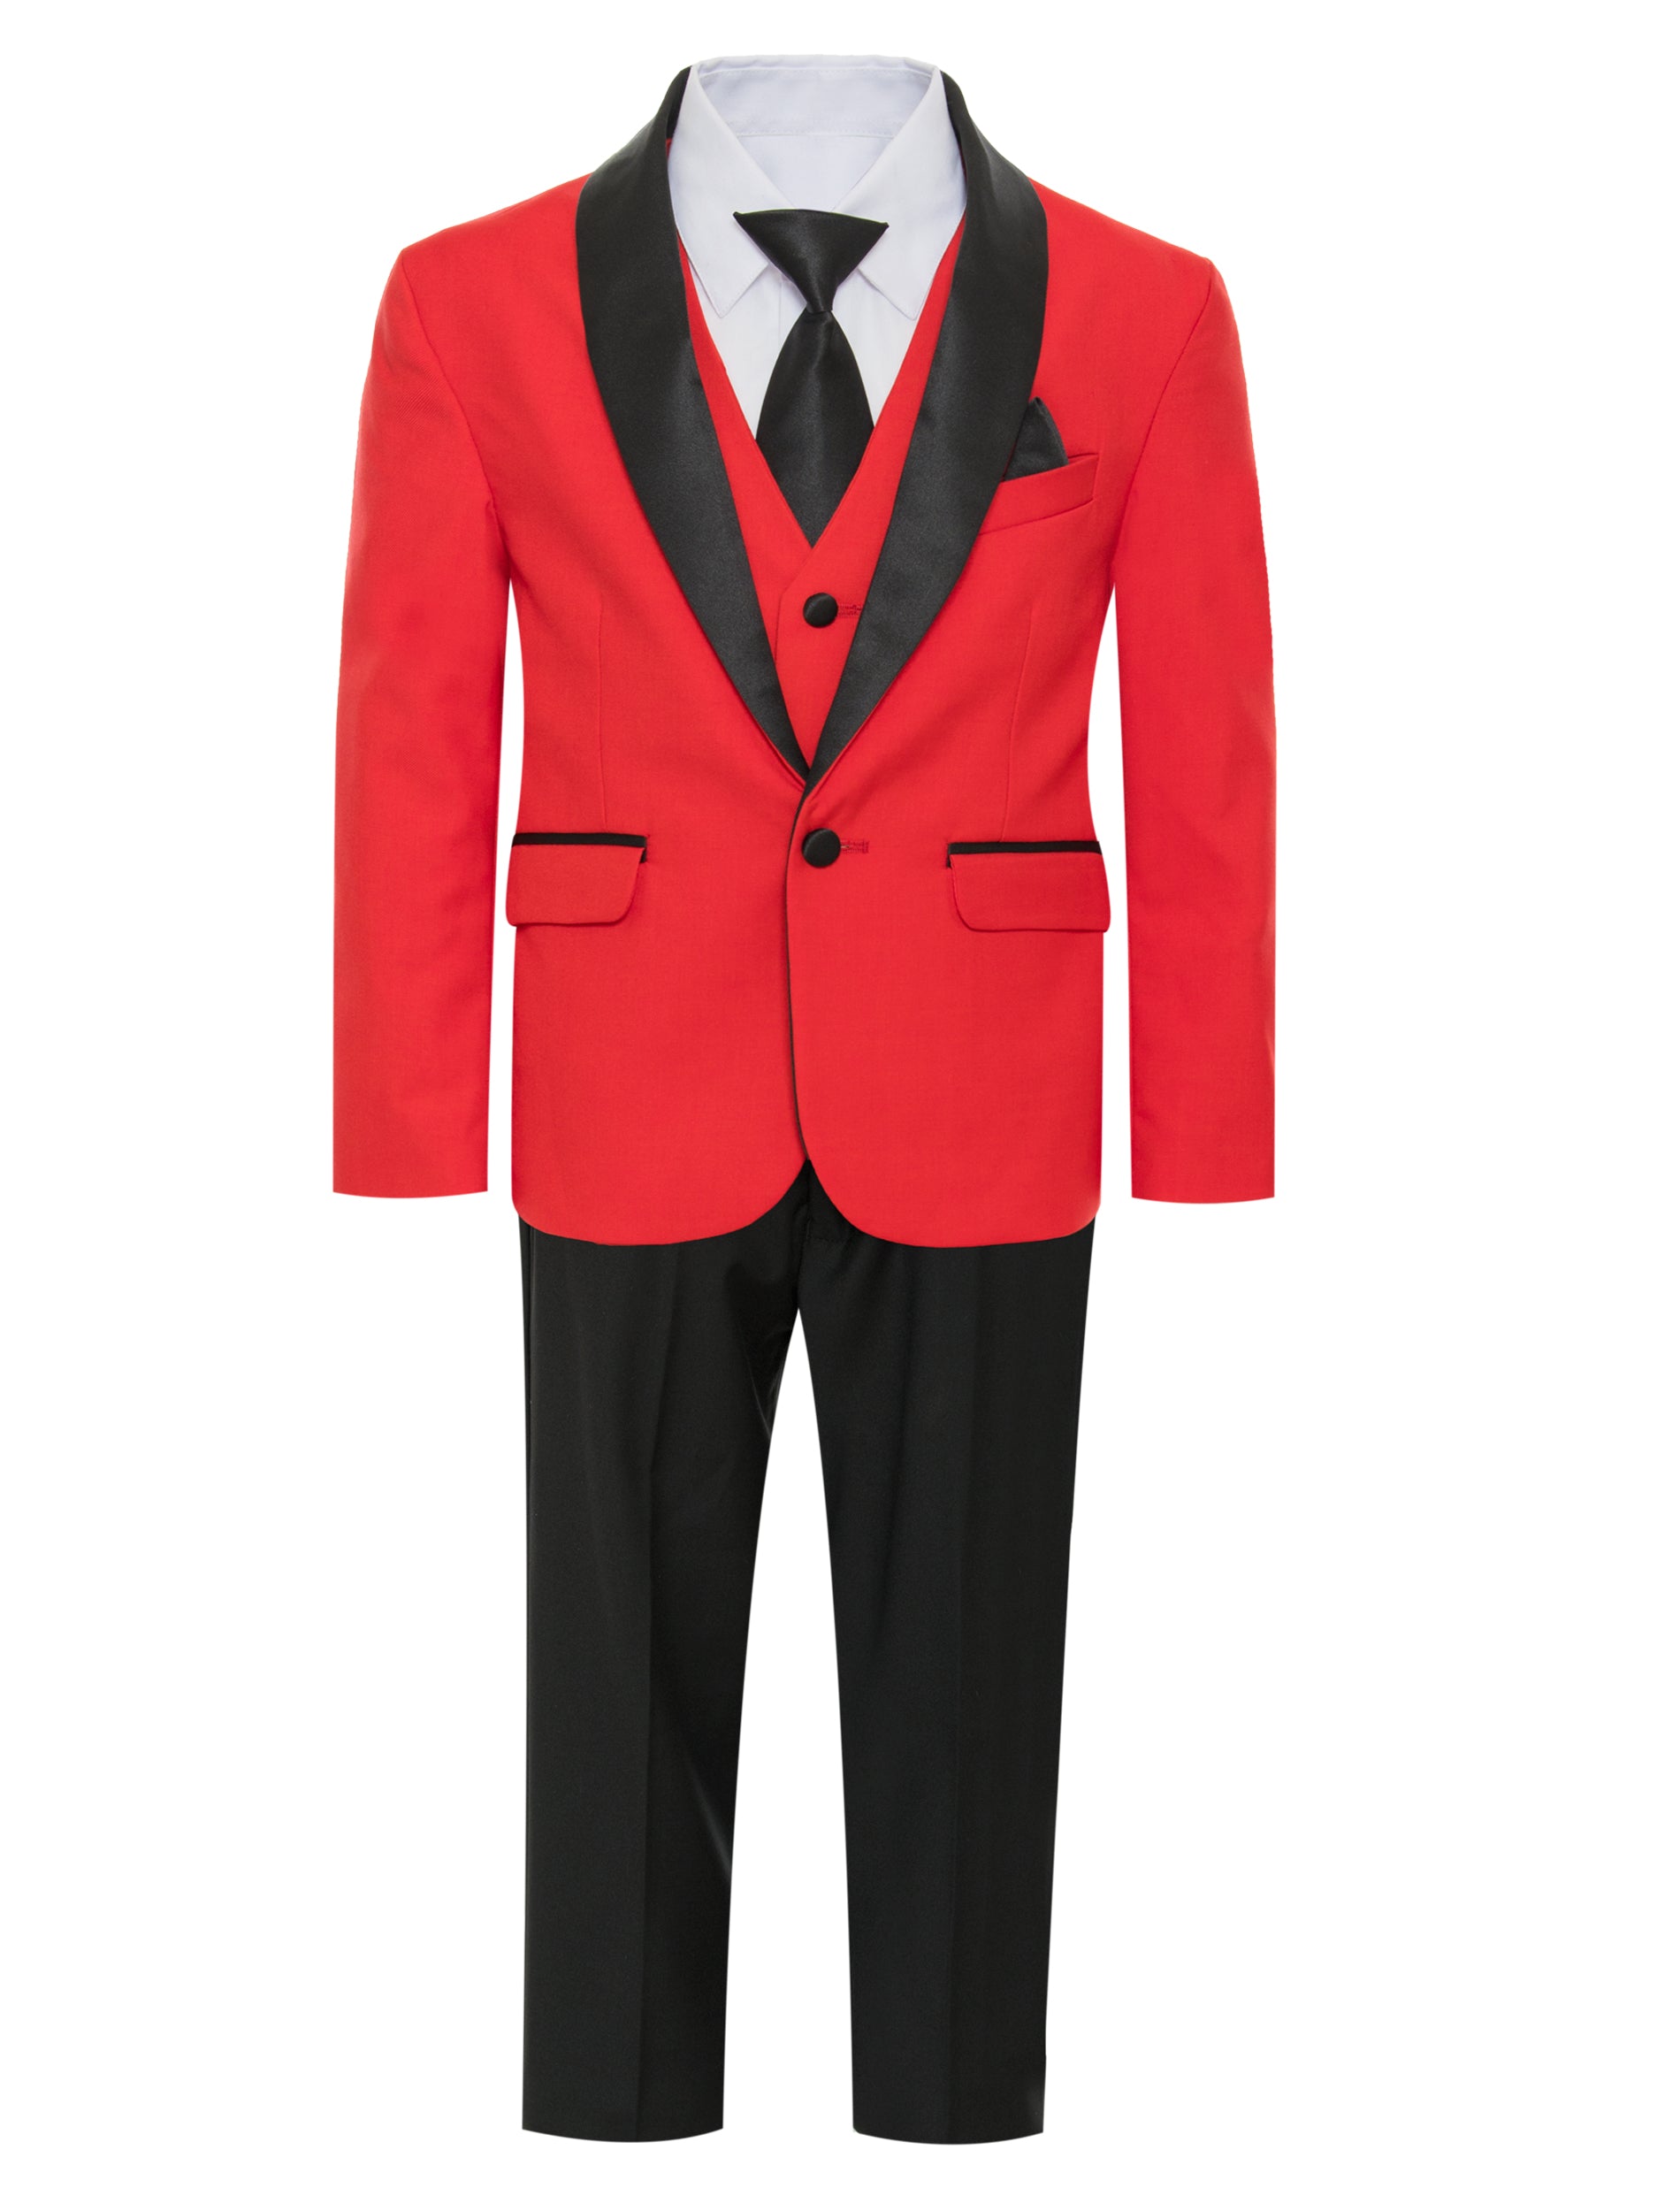 Shawl Tuxedo Suit, a masterpiece of style and panache, offering an array of captivating colors for a young man's bold statement.